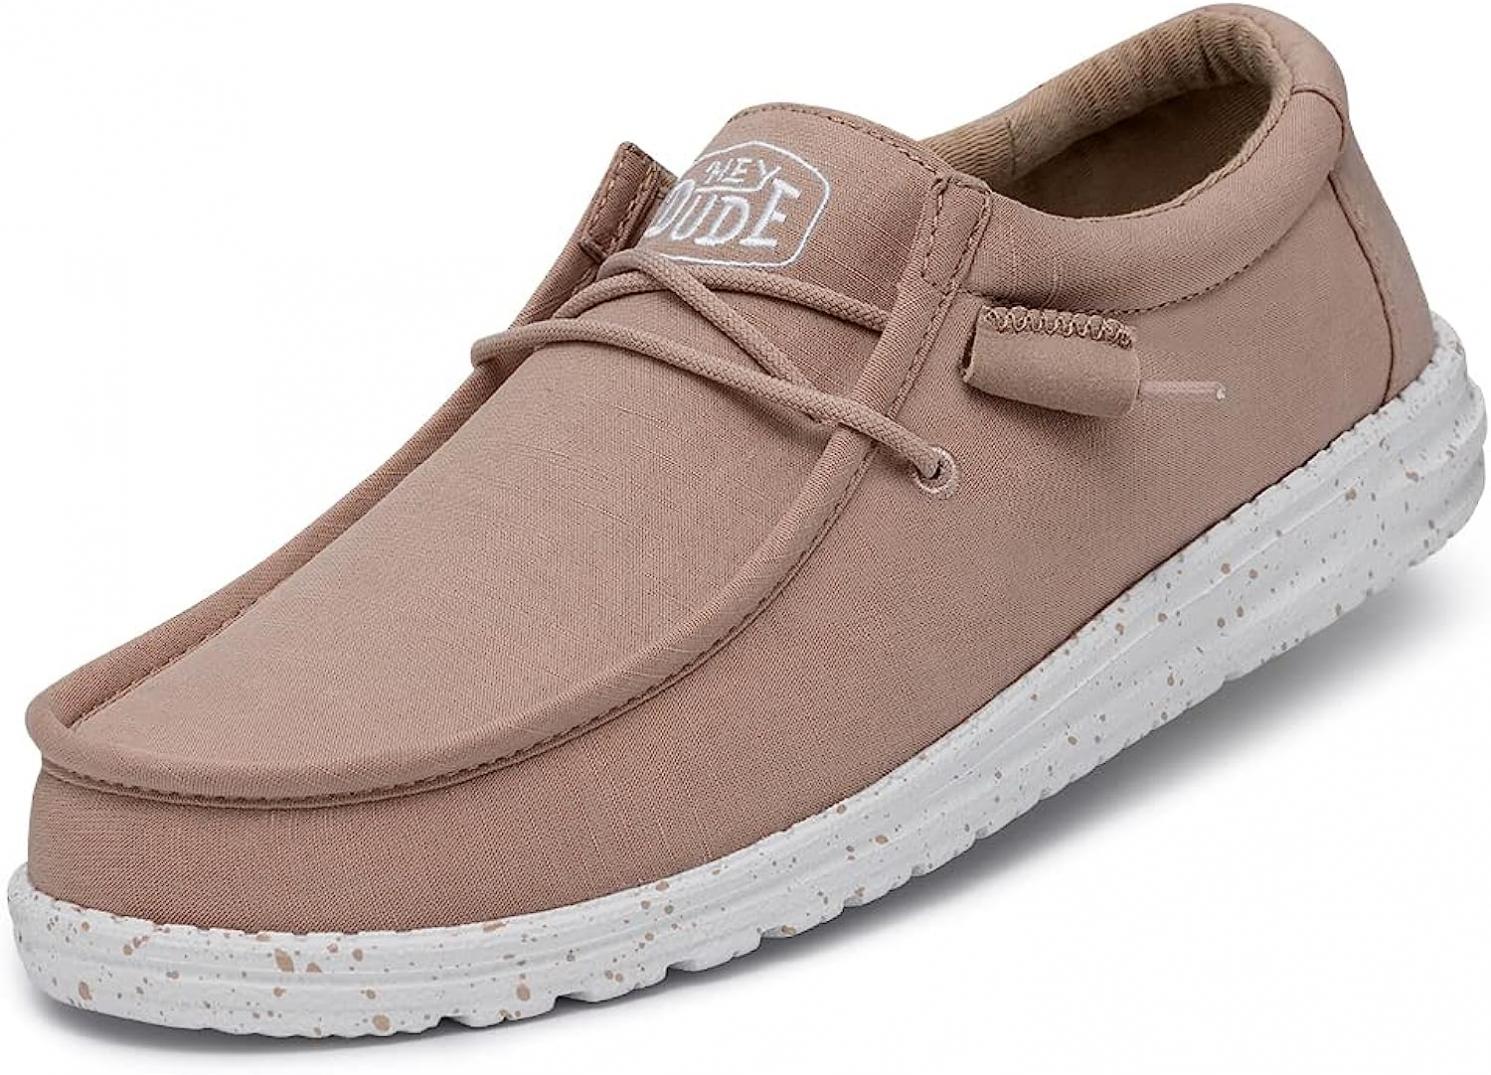 Hey Dude Men's Wally Slub Canvas Tan Size 6| Men's Loafers | Men's Slip On Shoes | Comfortable & Light-Weight